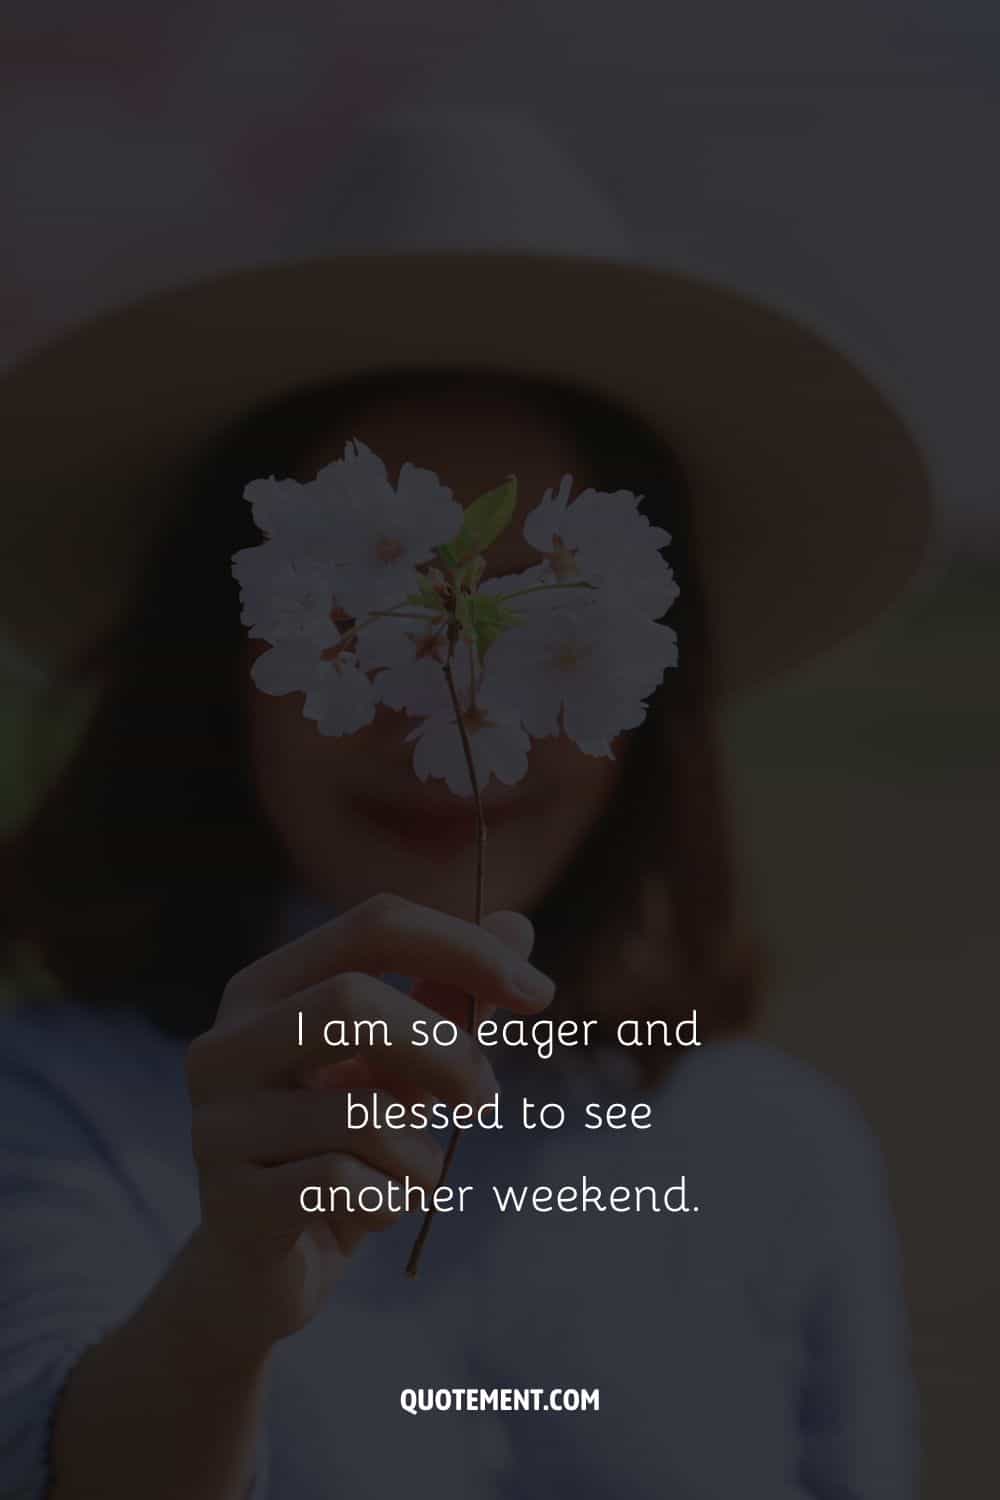 Girl with a hat holding flowers in her hand image representing affirmation for the weekend